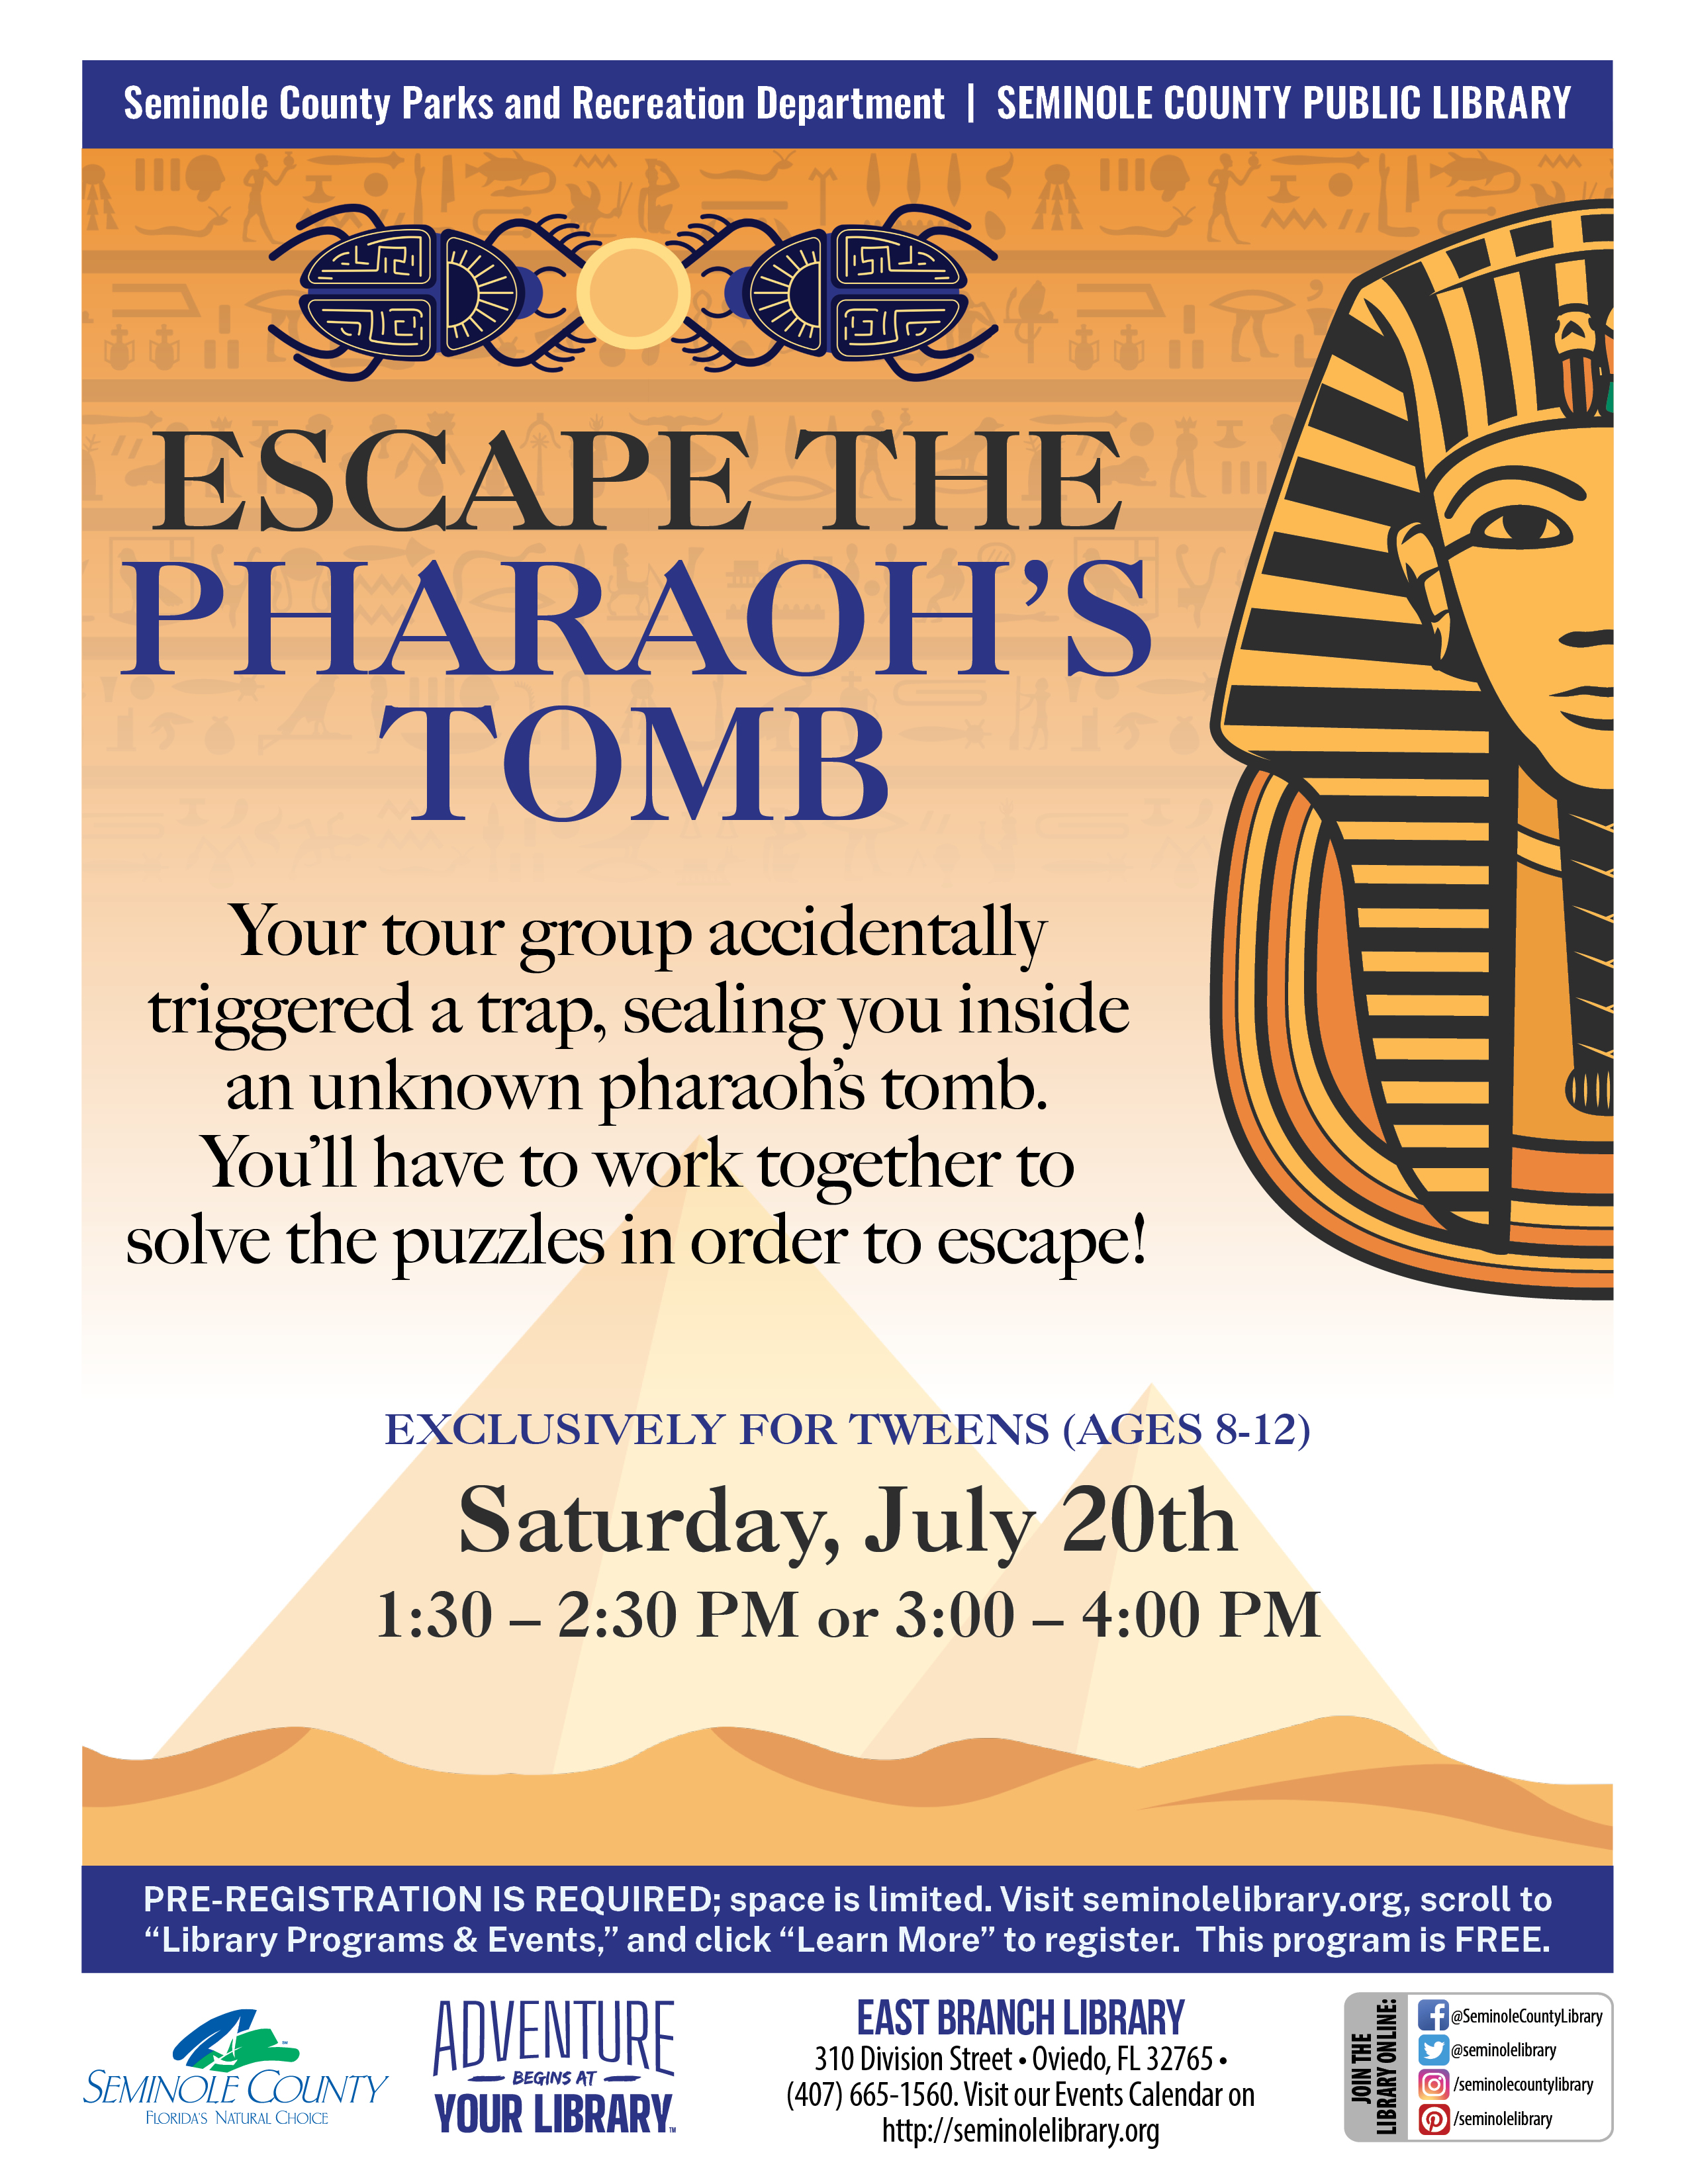 Escape the Pharaoh's Tomb - East